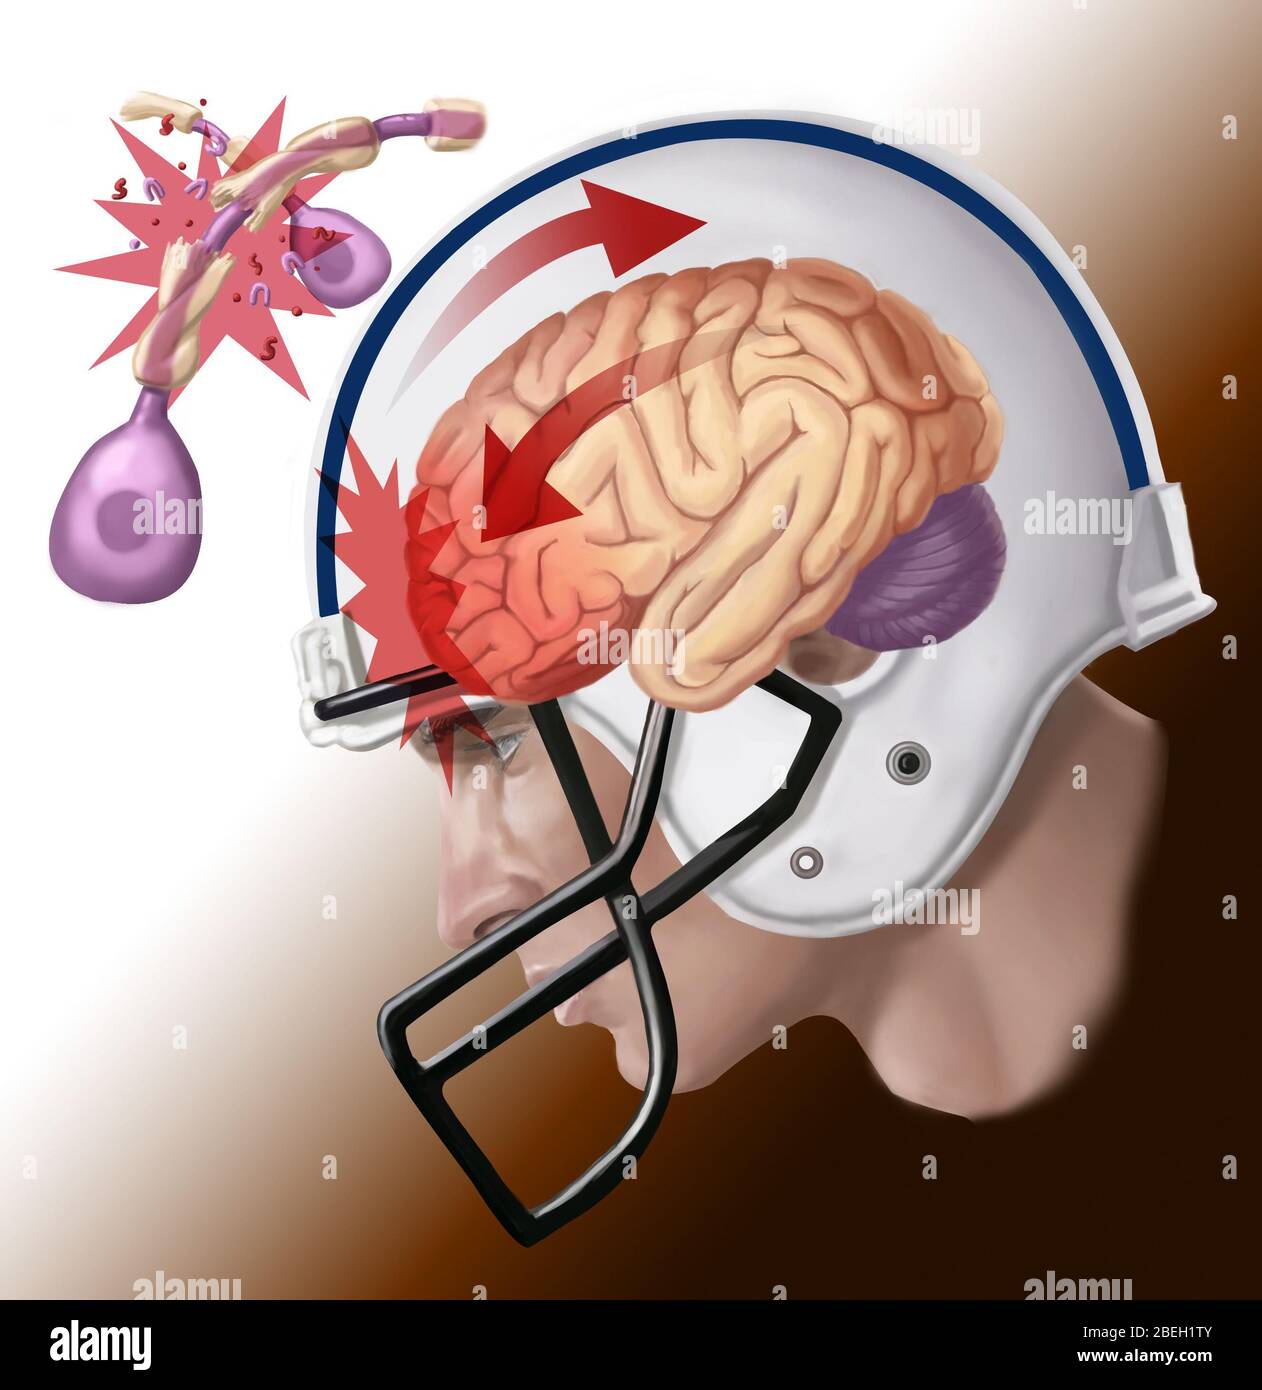 Illustration showing axon damage from a concussion, in which the brain's rotational force can cause axons to twist, tear, or break. Findings from a study of dead NFL athletes who suffered concussions suggest that lasting damage is done by axonal injuries. This damage, the severity of which increases with the cumulative number of concussions sustained, can lead to a variety of other health issues. Stock Photo